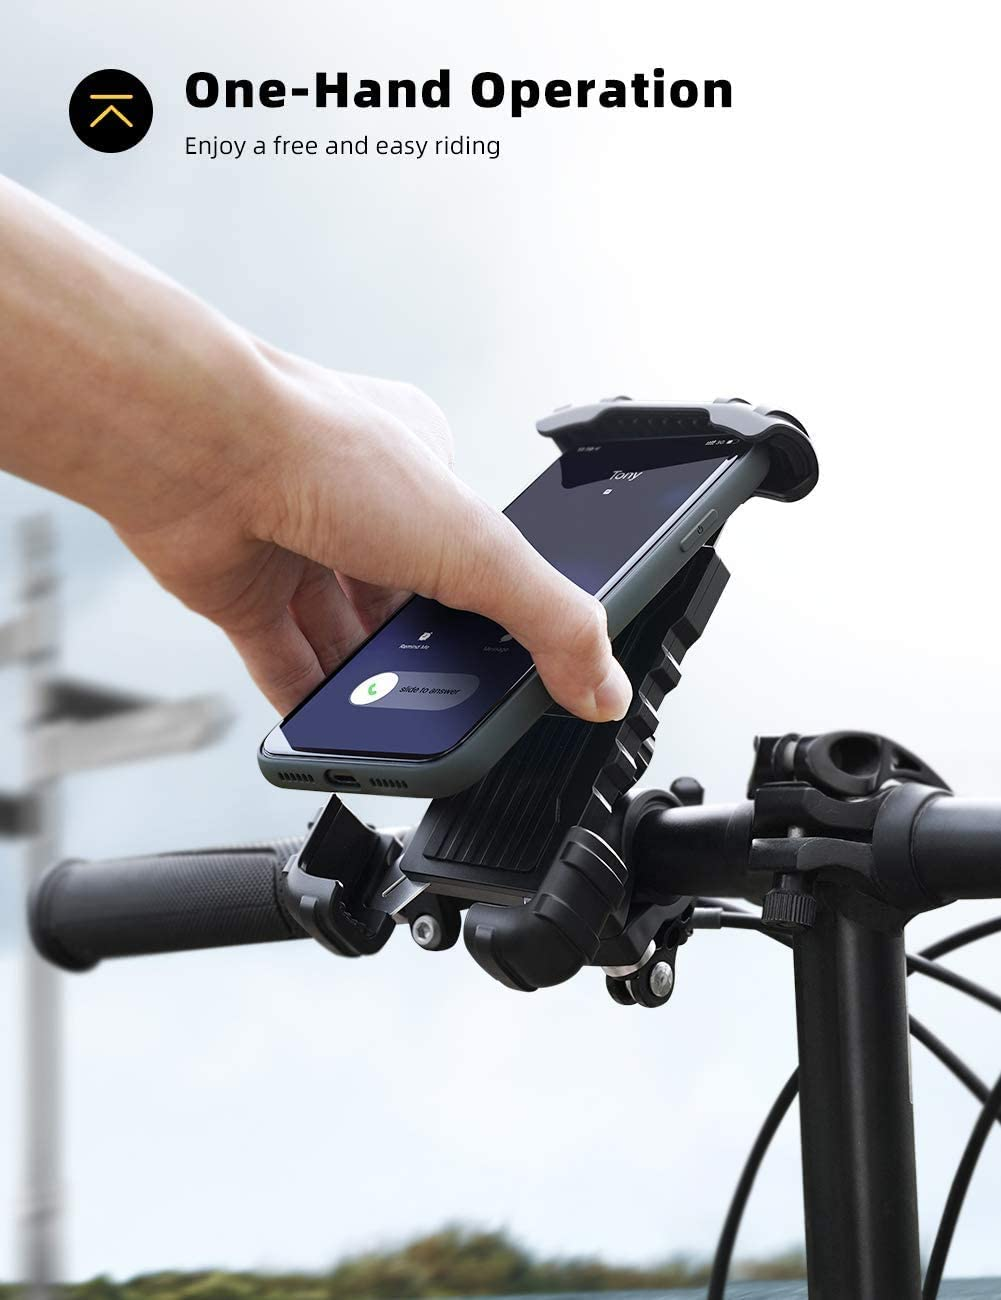 Bike Phone Holder, Motorcycle Phone Mount -  Motorcycle Handlebar Cell Phone Clamp, Scooter Phone Clip for Phone 11 / Phone 11 Pro Max, S9, S10 and More 4.7" - 6.8" Cellphone